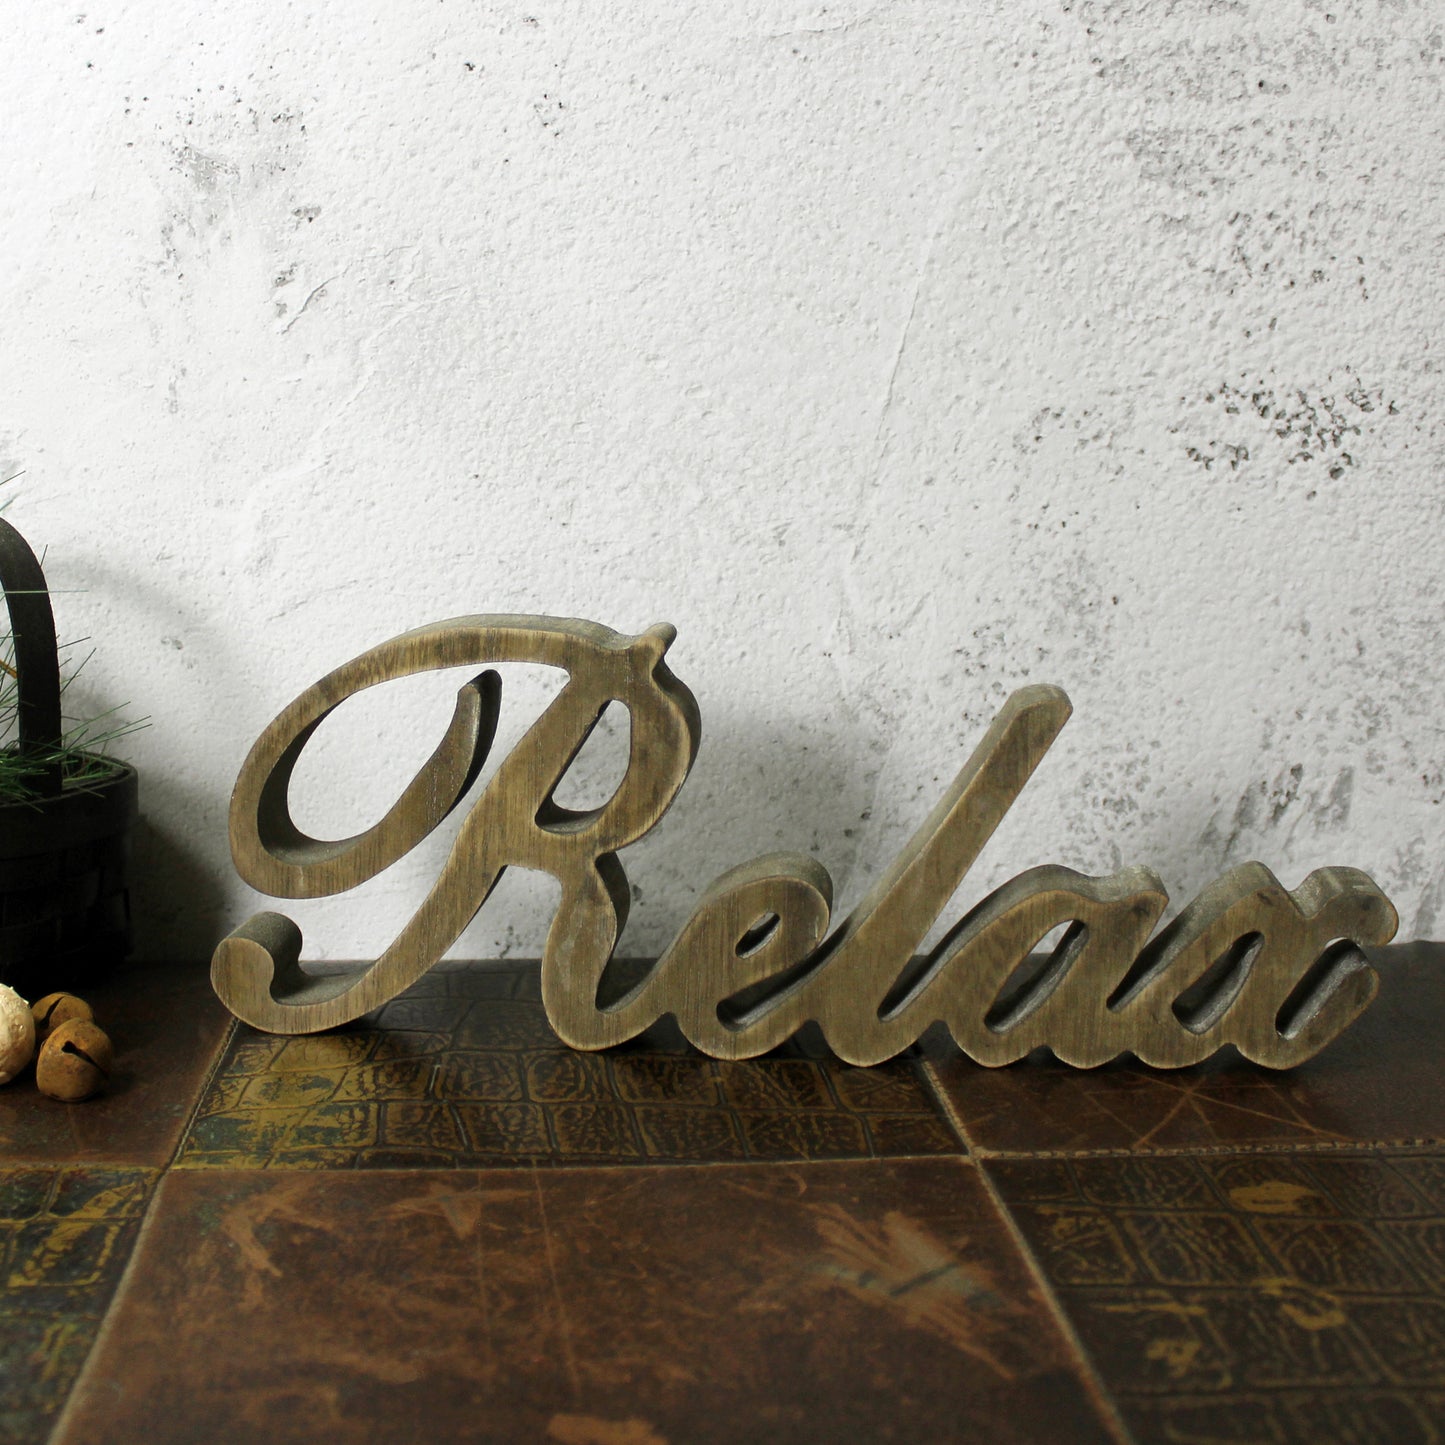 CVHOMEDECO. Rustic Vintage Distressed Wooden Words Sign Free Standing "Relax" Tabletop/Shelf/Home Wall/Office Decoration Art, 12 x 4.25 x 1 Inch